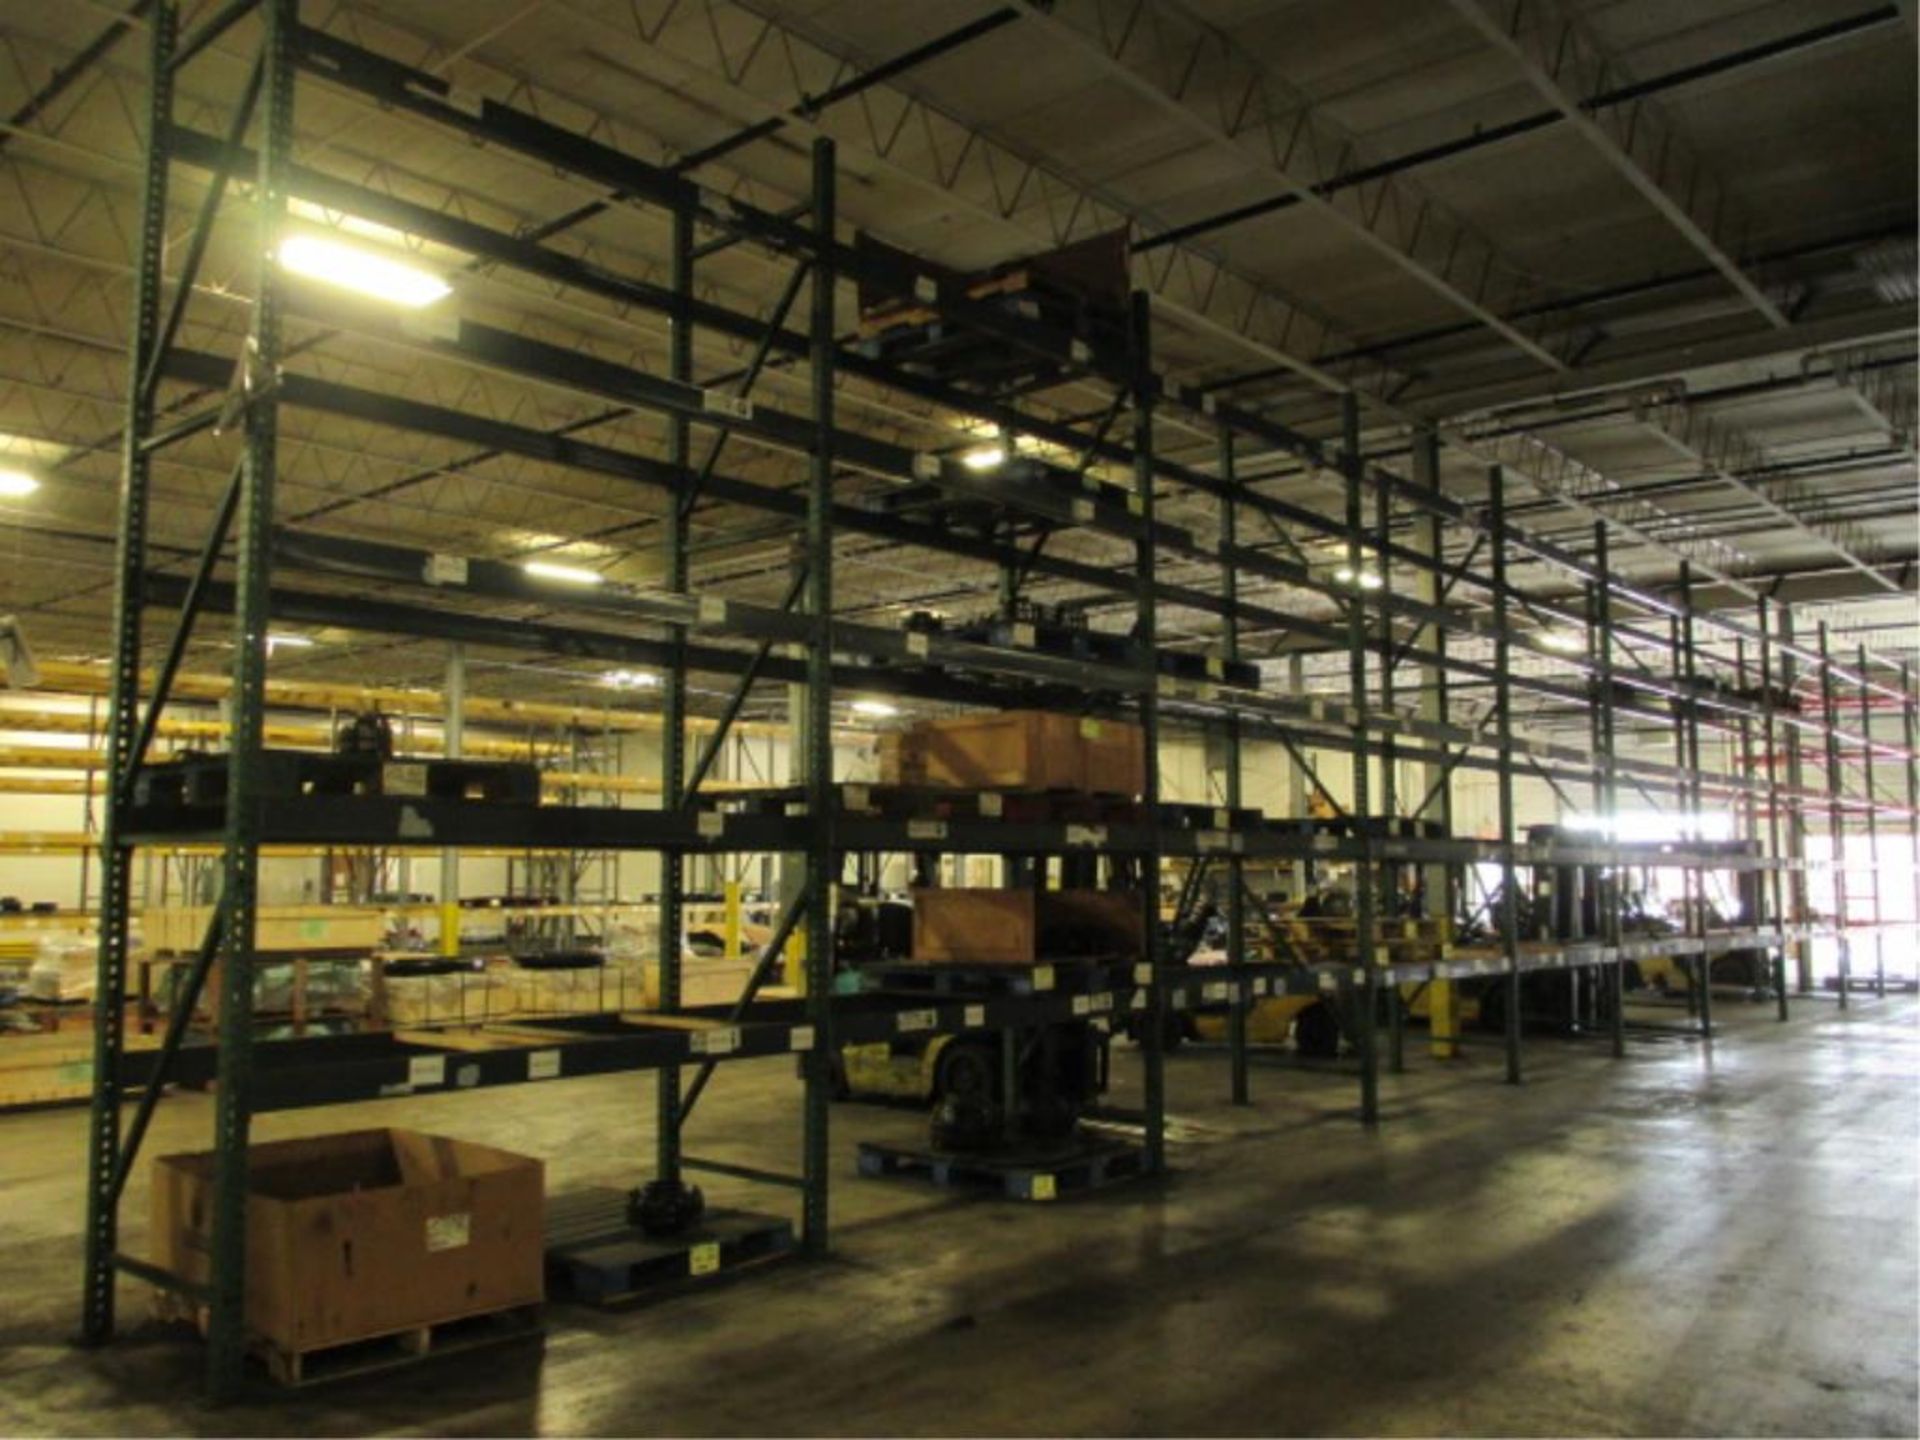 Lot: (5 Tier, 11 sections) Warehouse Pallet Racking, Teardrop Style. Consisting of: (11) Upright